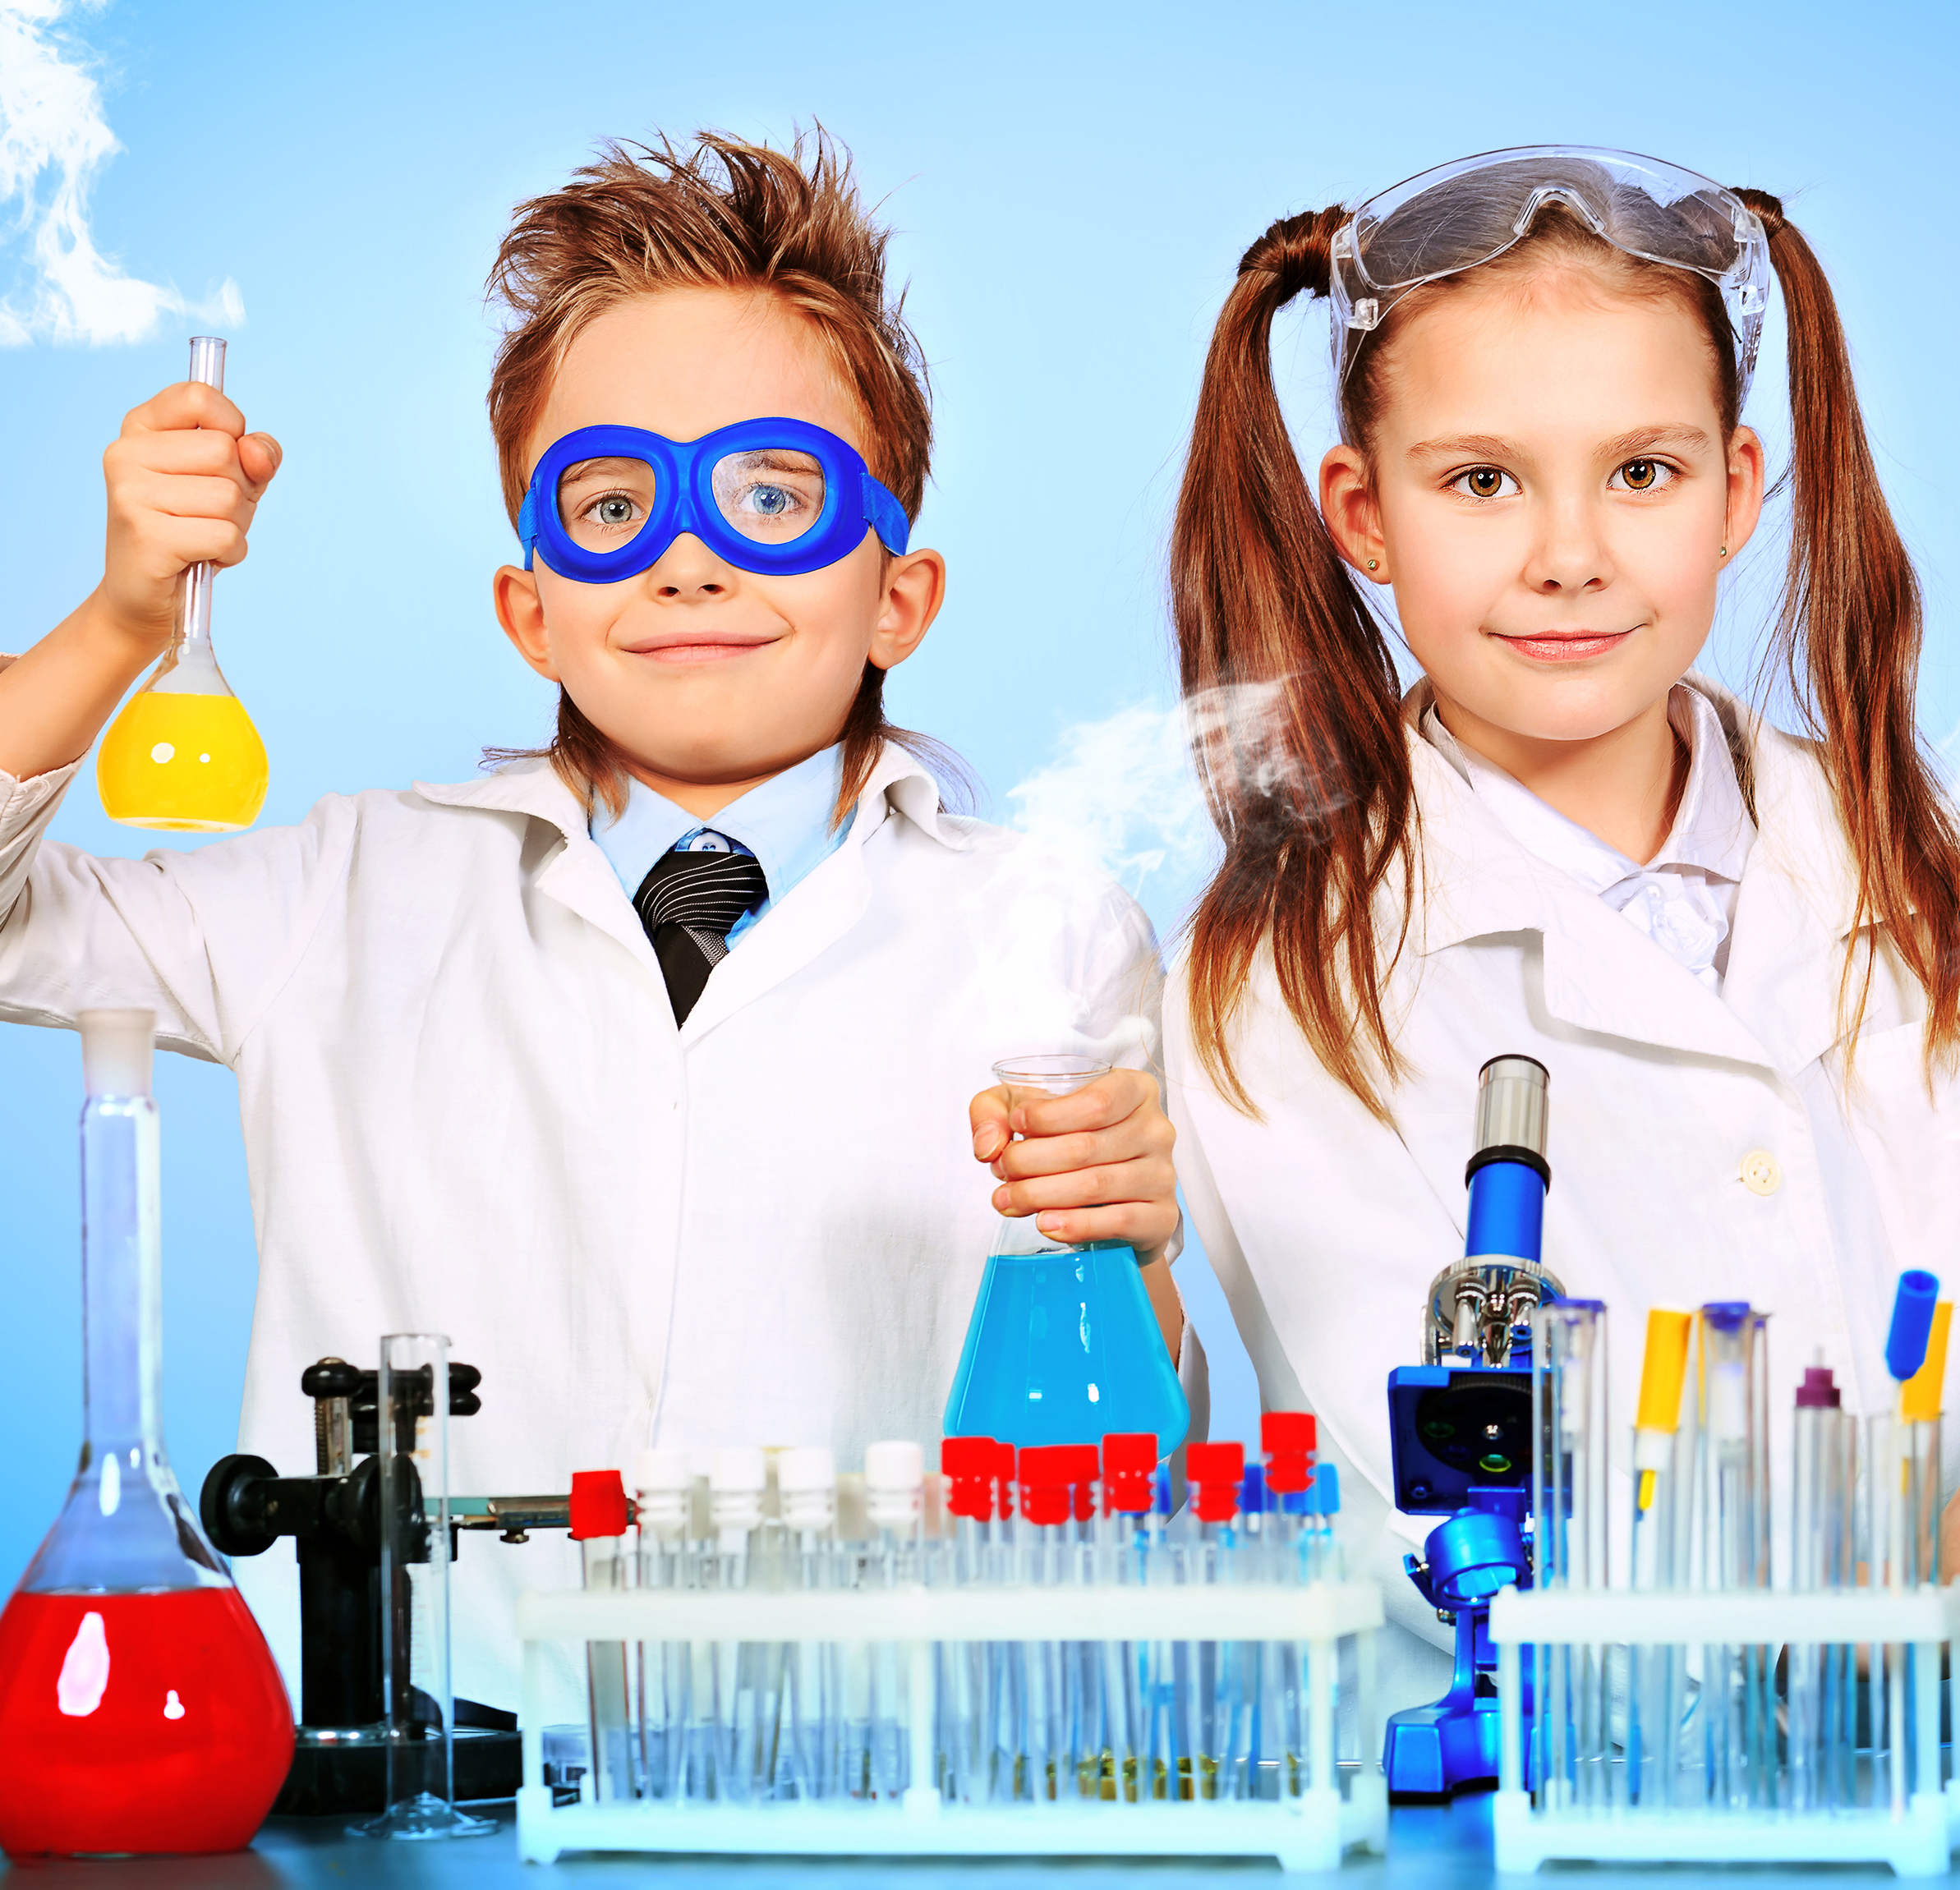 Image of kids conducting a science experiment.